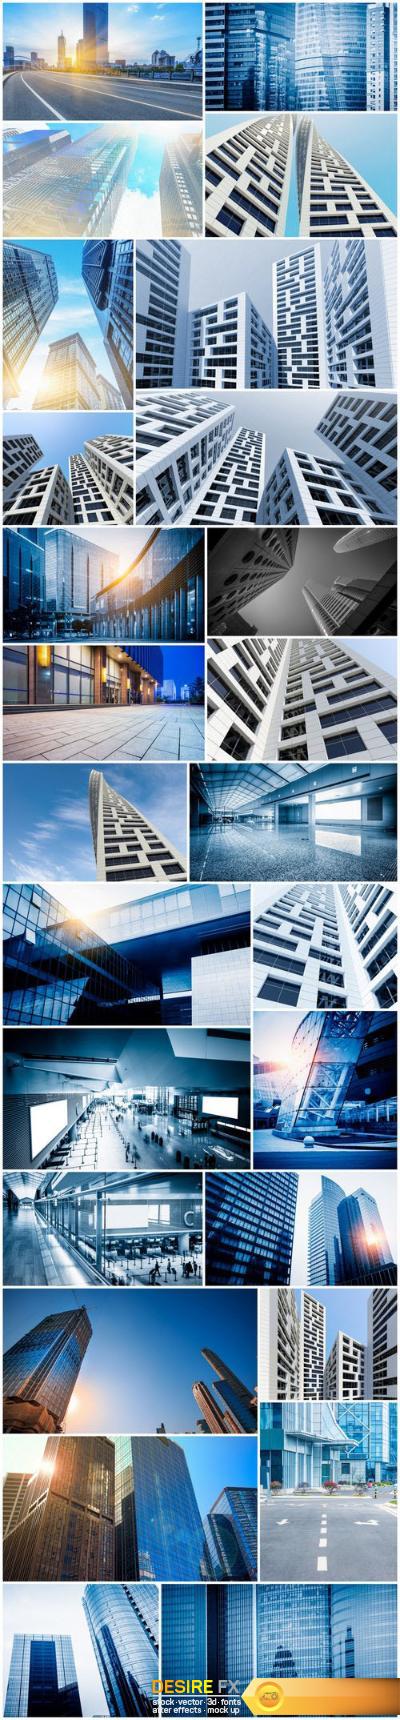 Modern Architecture 6 - Set of 26xUHQ JPEG Professional Stock Images